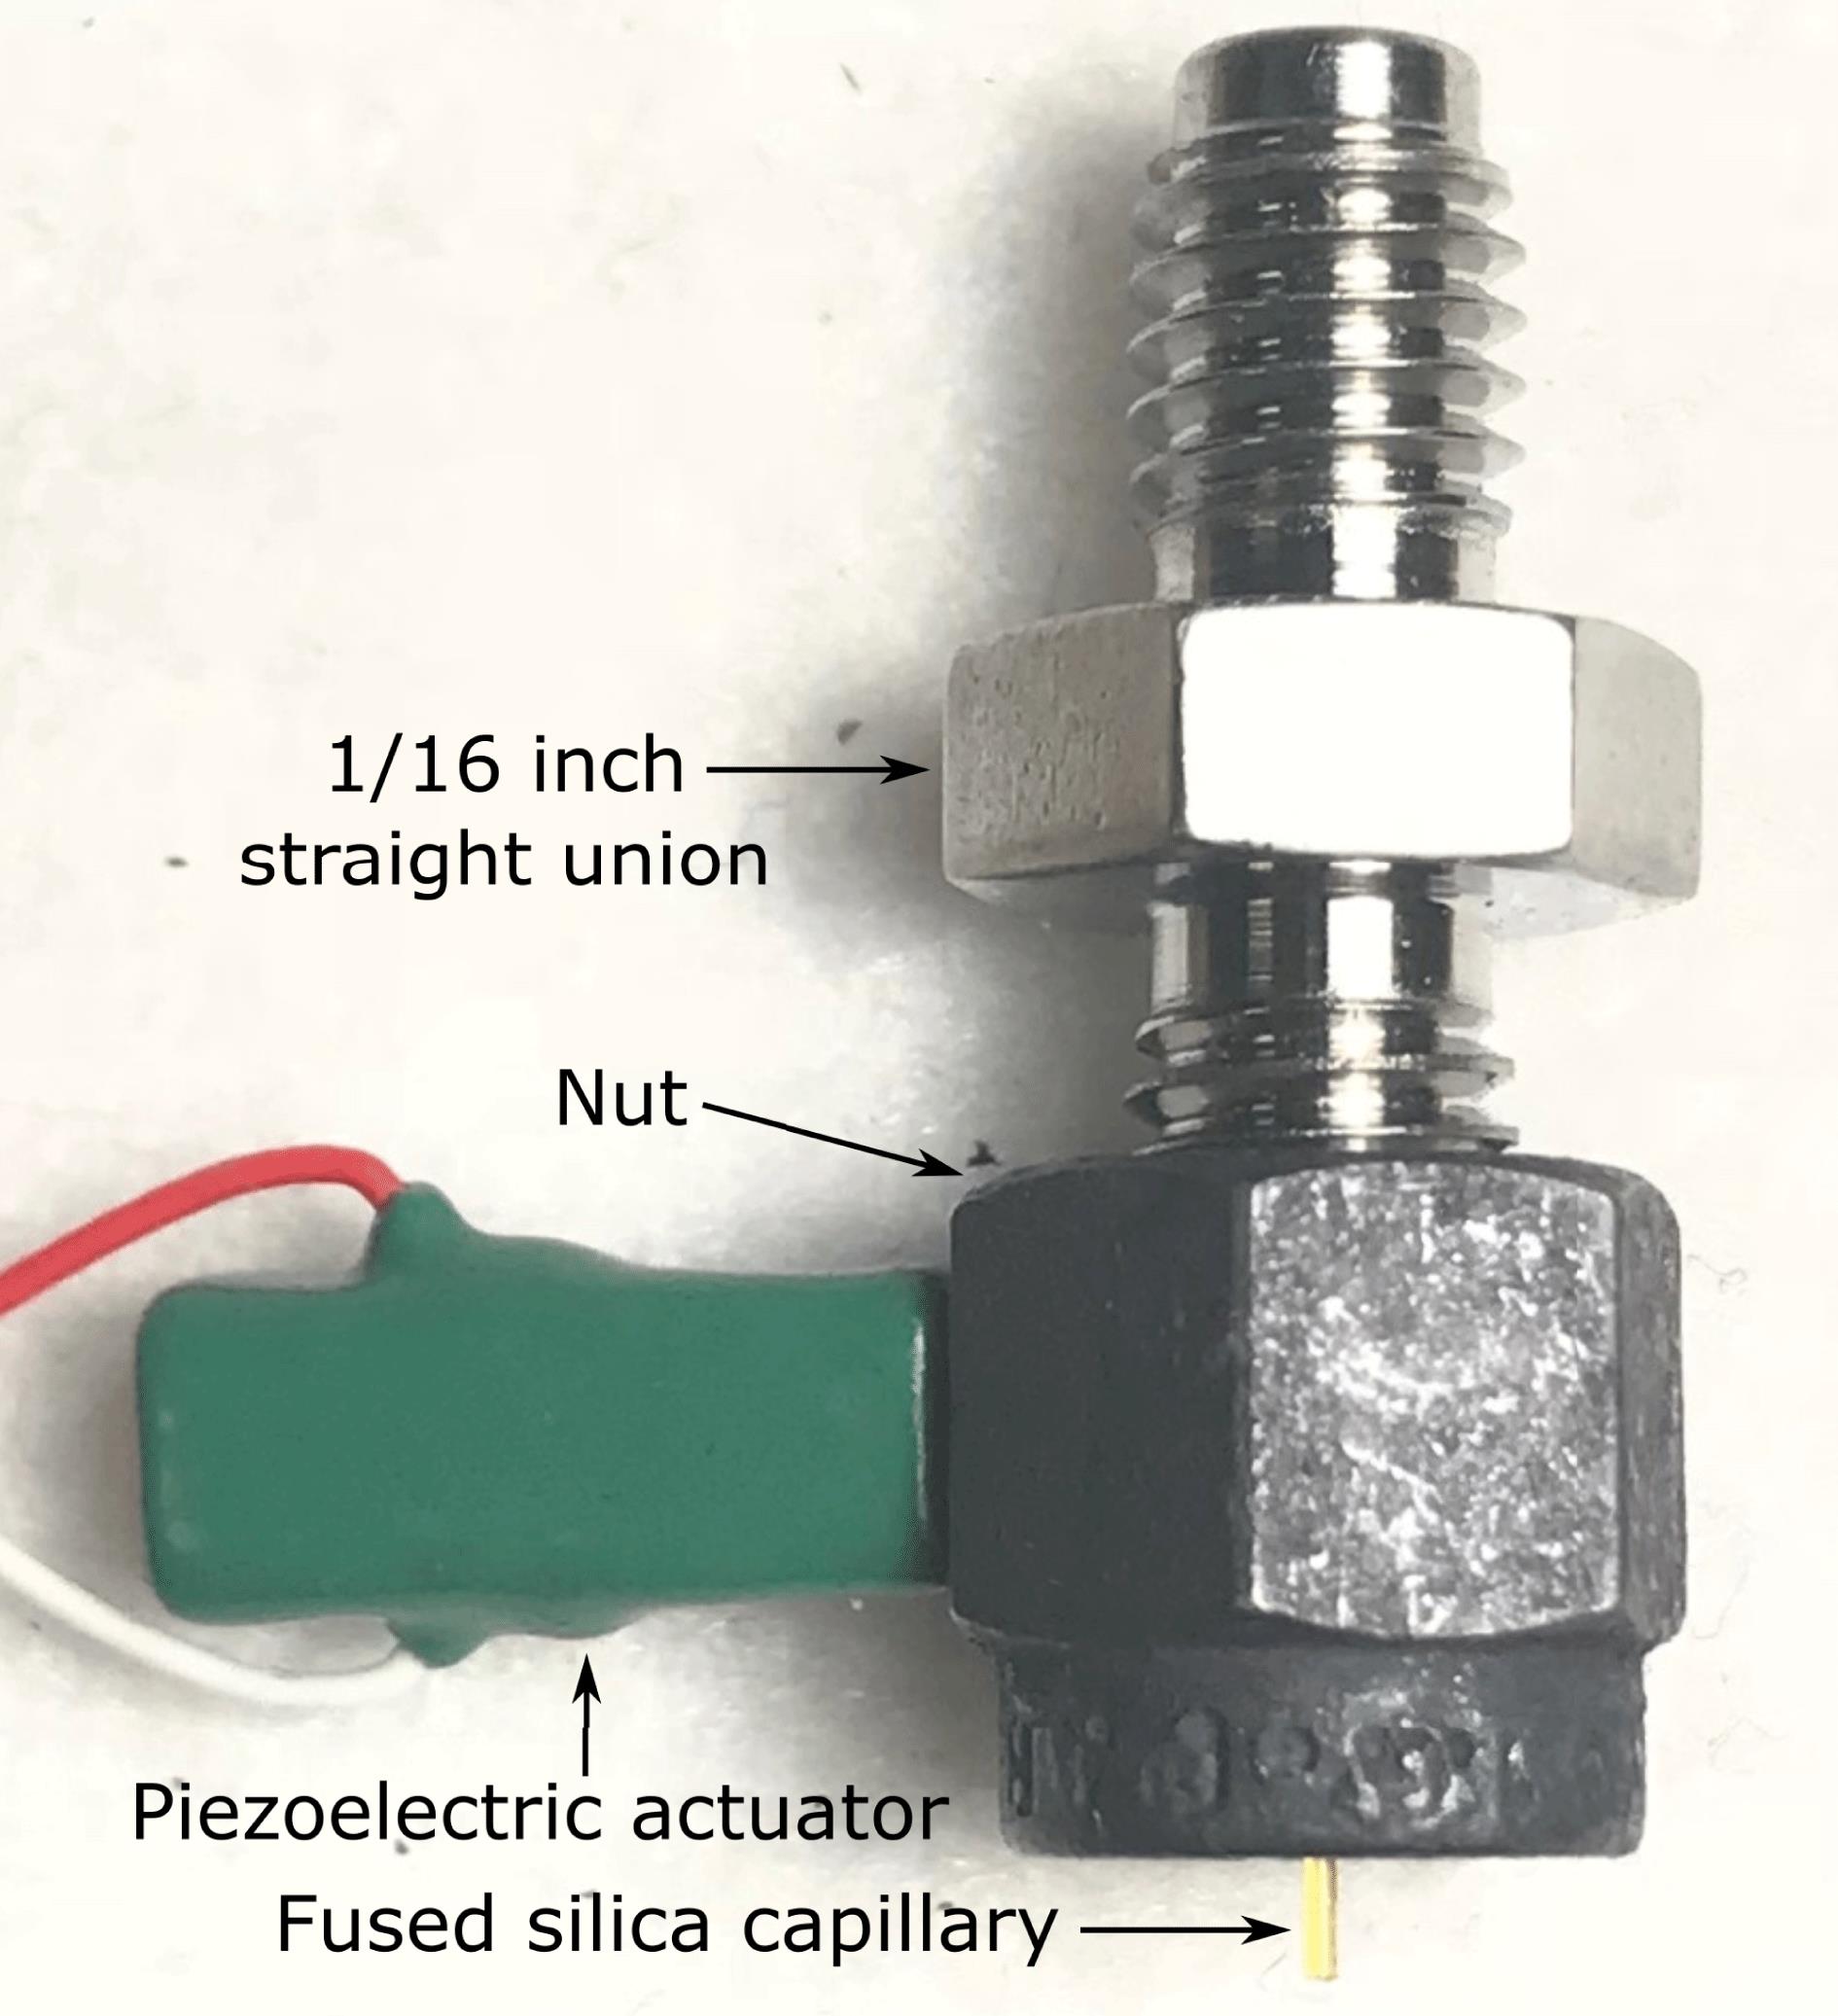 Liquid microjet nozzle assembly composed of a $1/16$ inch Swagelok fitting, Vespel ferrule, $30~\unicode[STIX]{x03BC}\text{m}$ inner diameter glass capillary tube, and locking nut with affixed piezoelectric actuator for droplet formation.